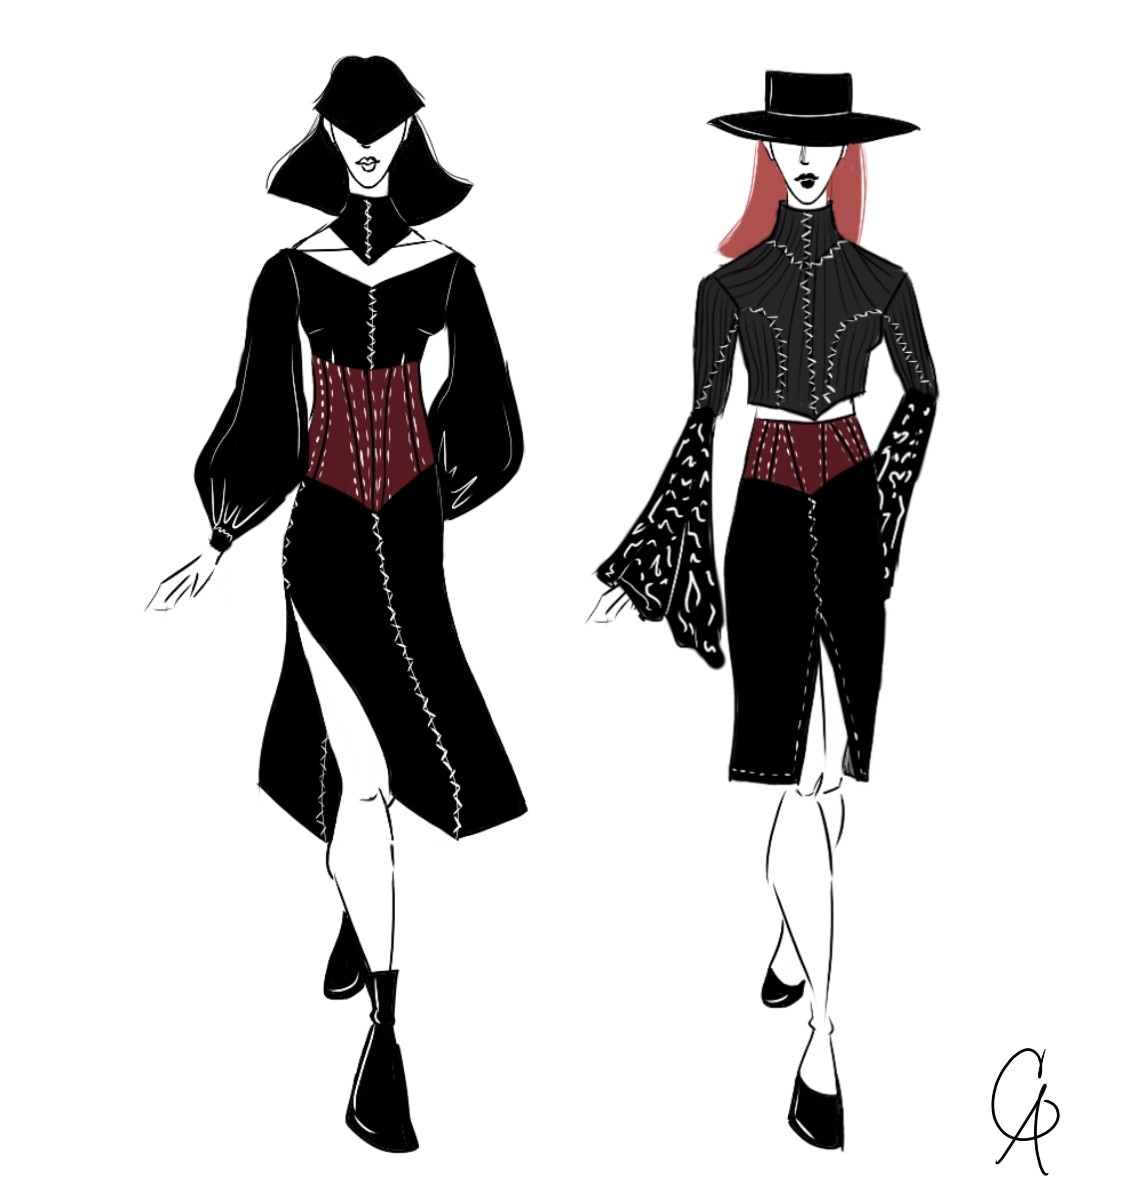 Digital Illustration of Look 4 and Look 5 from the Behind the Mirror Collection, titled Mirage and Uncanny Gloom respectfully. These outfits are not featured in the fashion film.